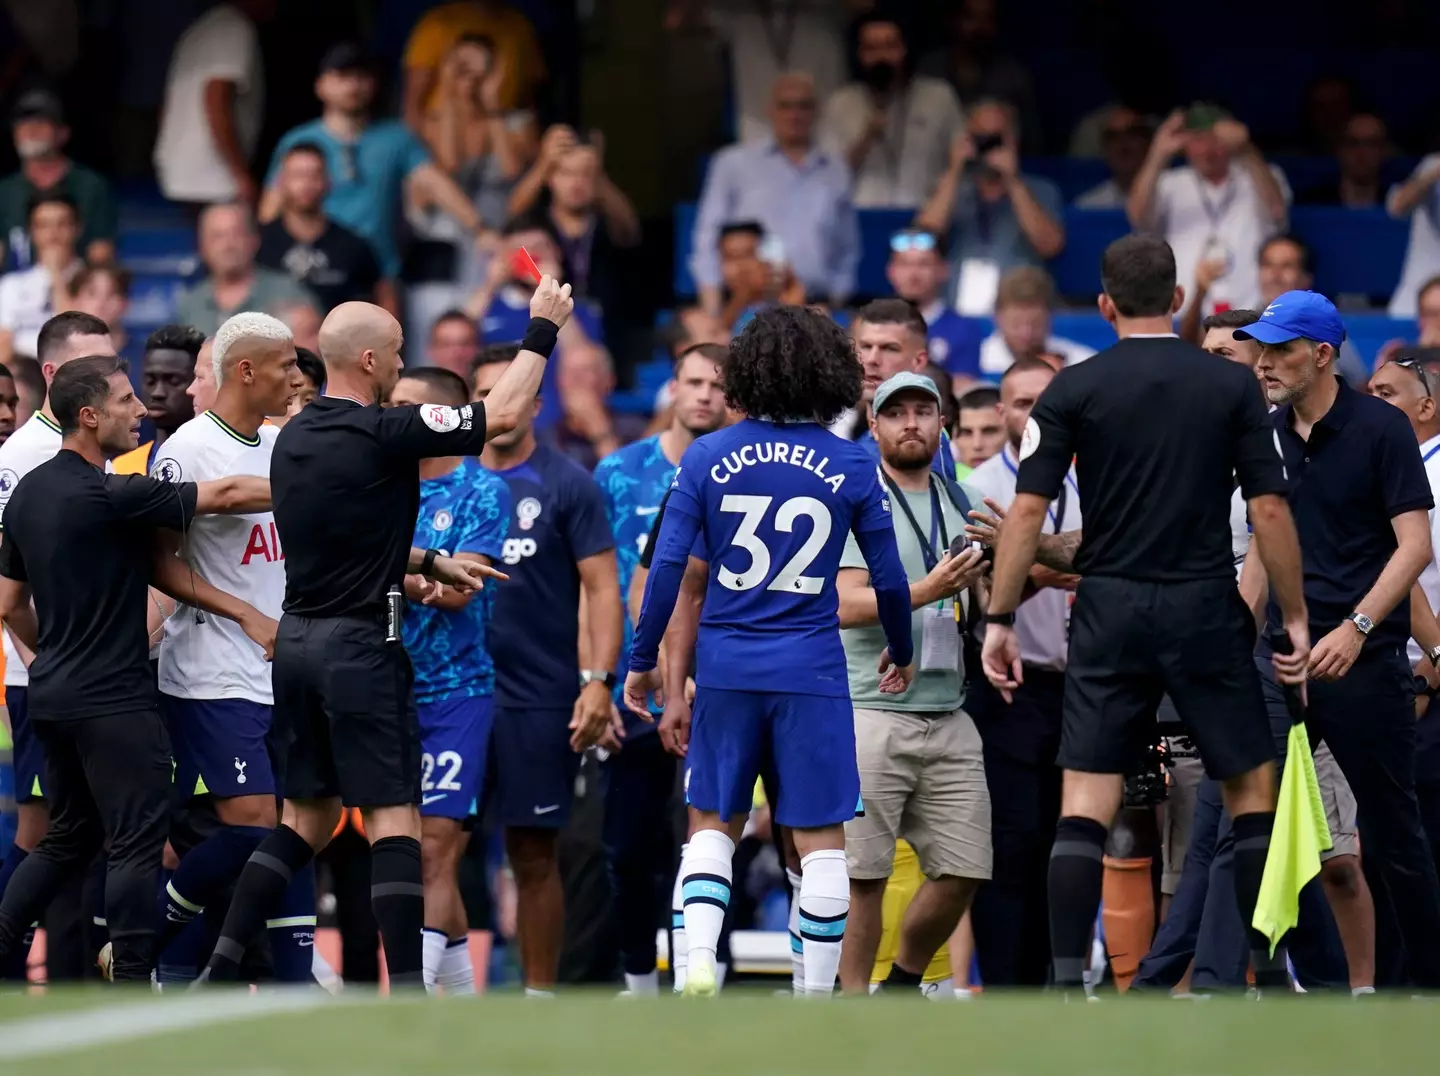 Chelsea manager Thomas Tuchel is sent off by referee Anthony Taylor during the Premier League match at Stamford Bridge. (Alamy)